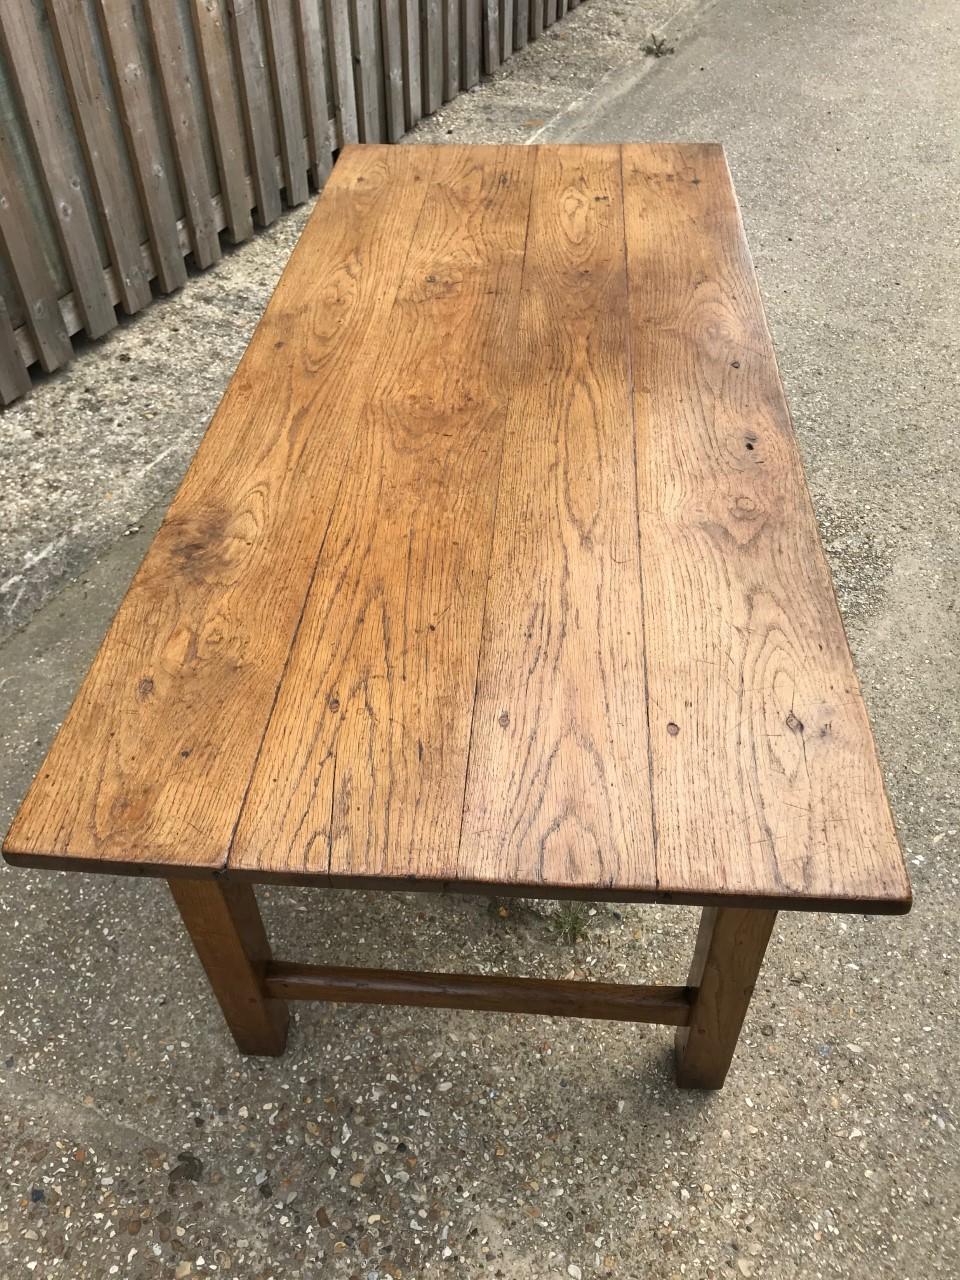 Two-drawer antique oak desk with four plank top. The end stretcher supports square legs. Gorgeous color and patination. Lovely as a little desk or lamp table. Could also be used as small dining table.